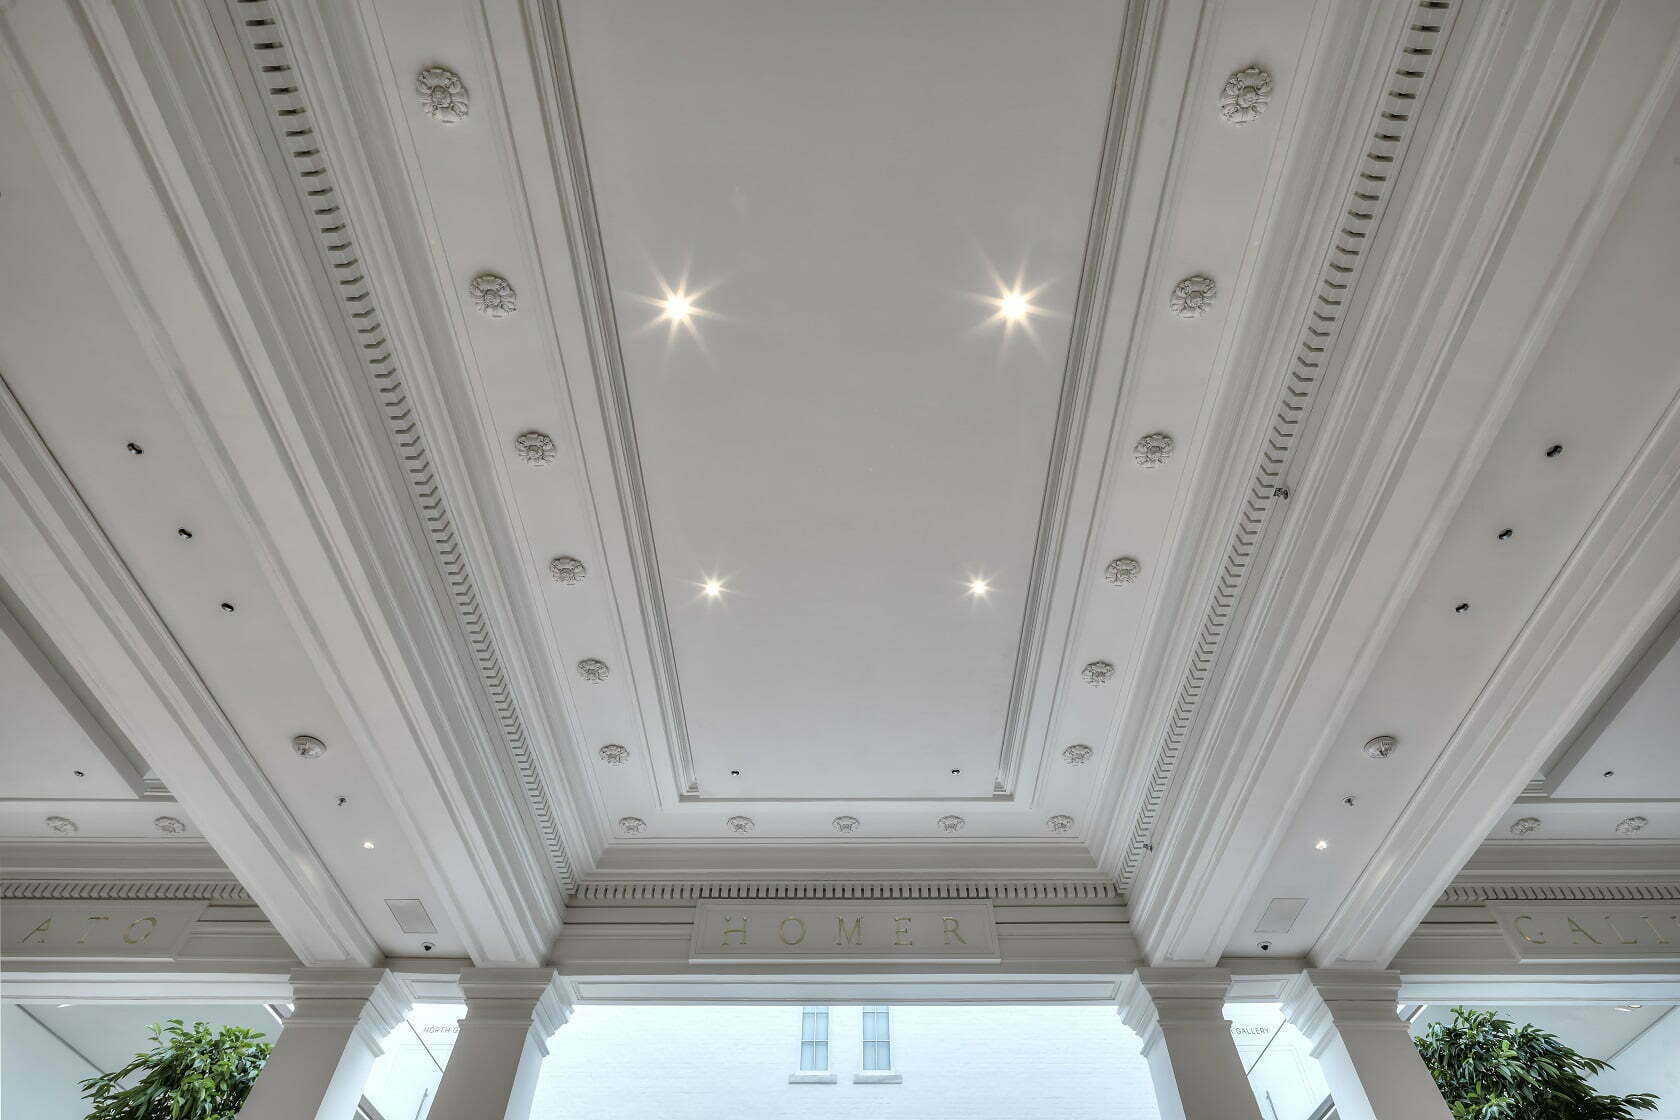 Ceiling close up inside the Carnegie Library in Washington DC, USA